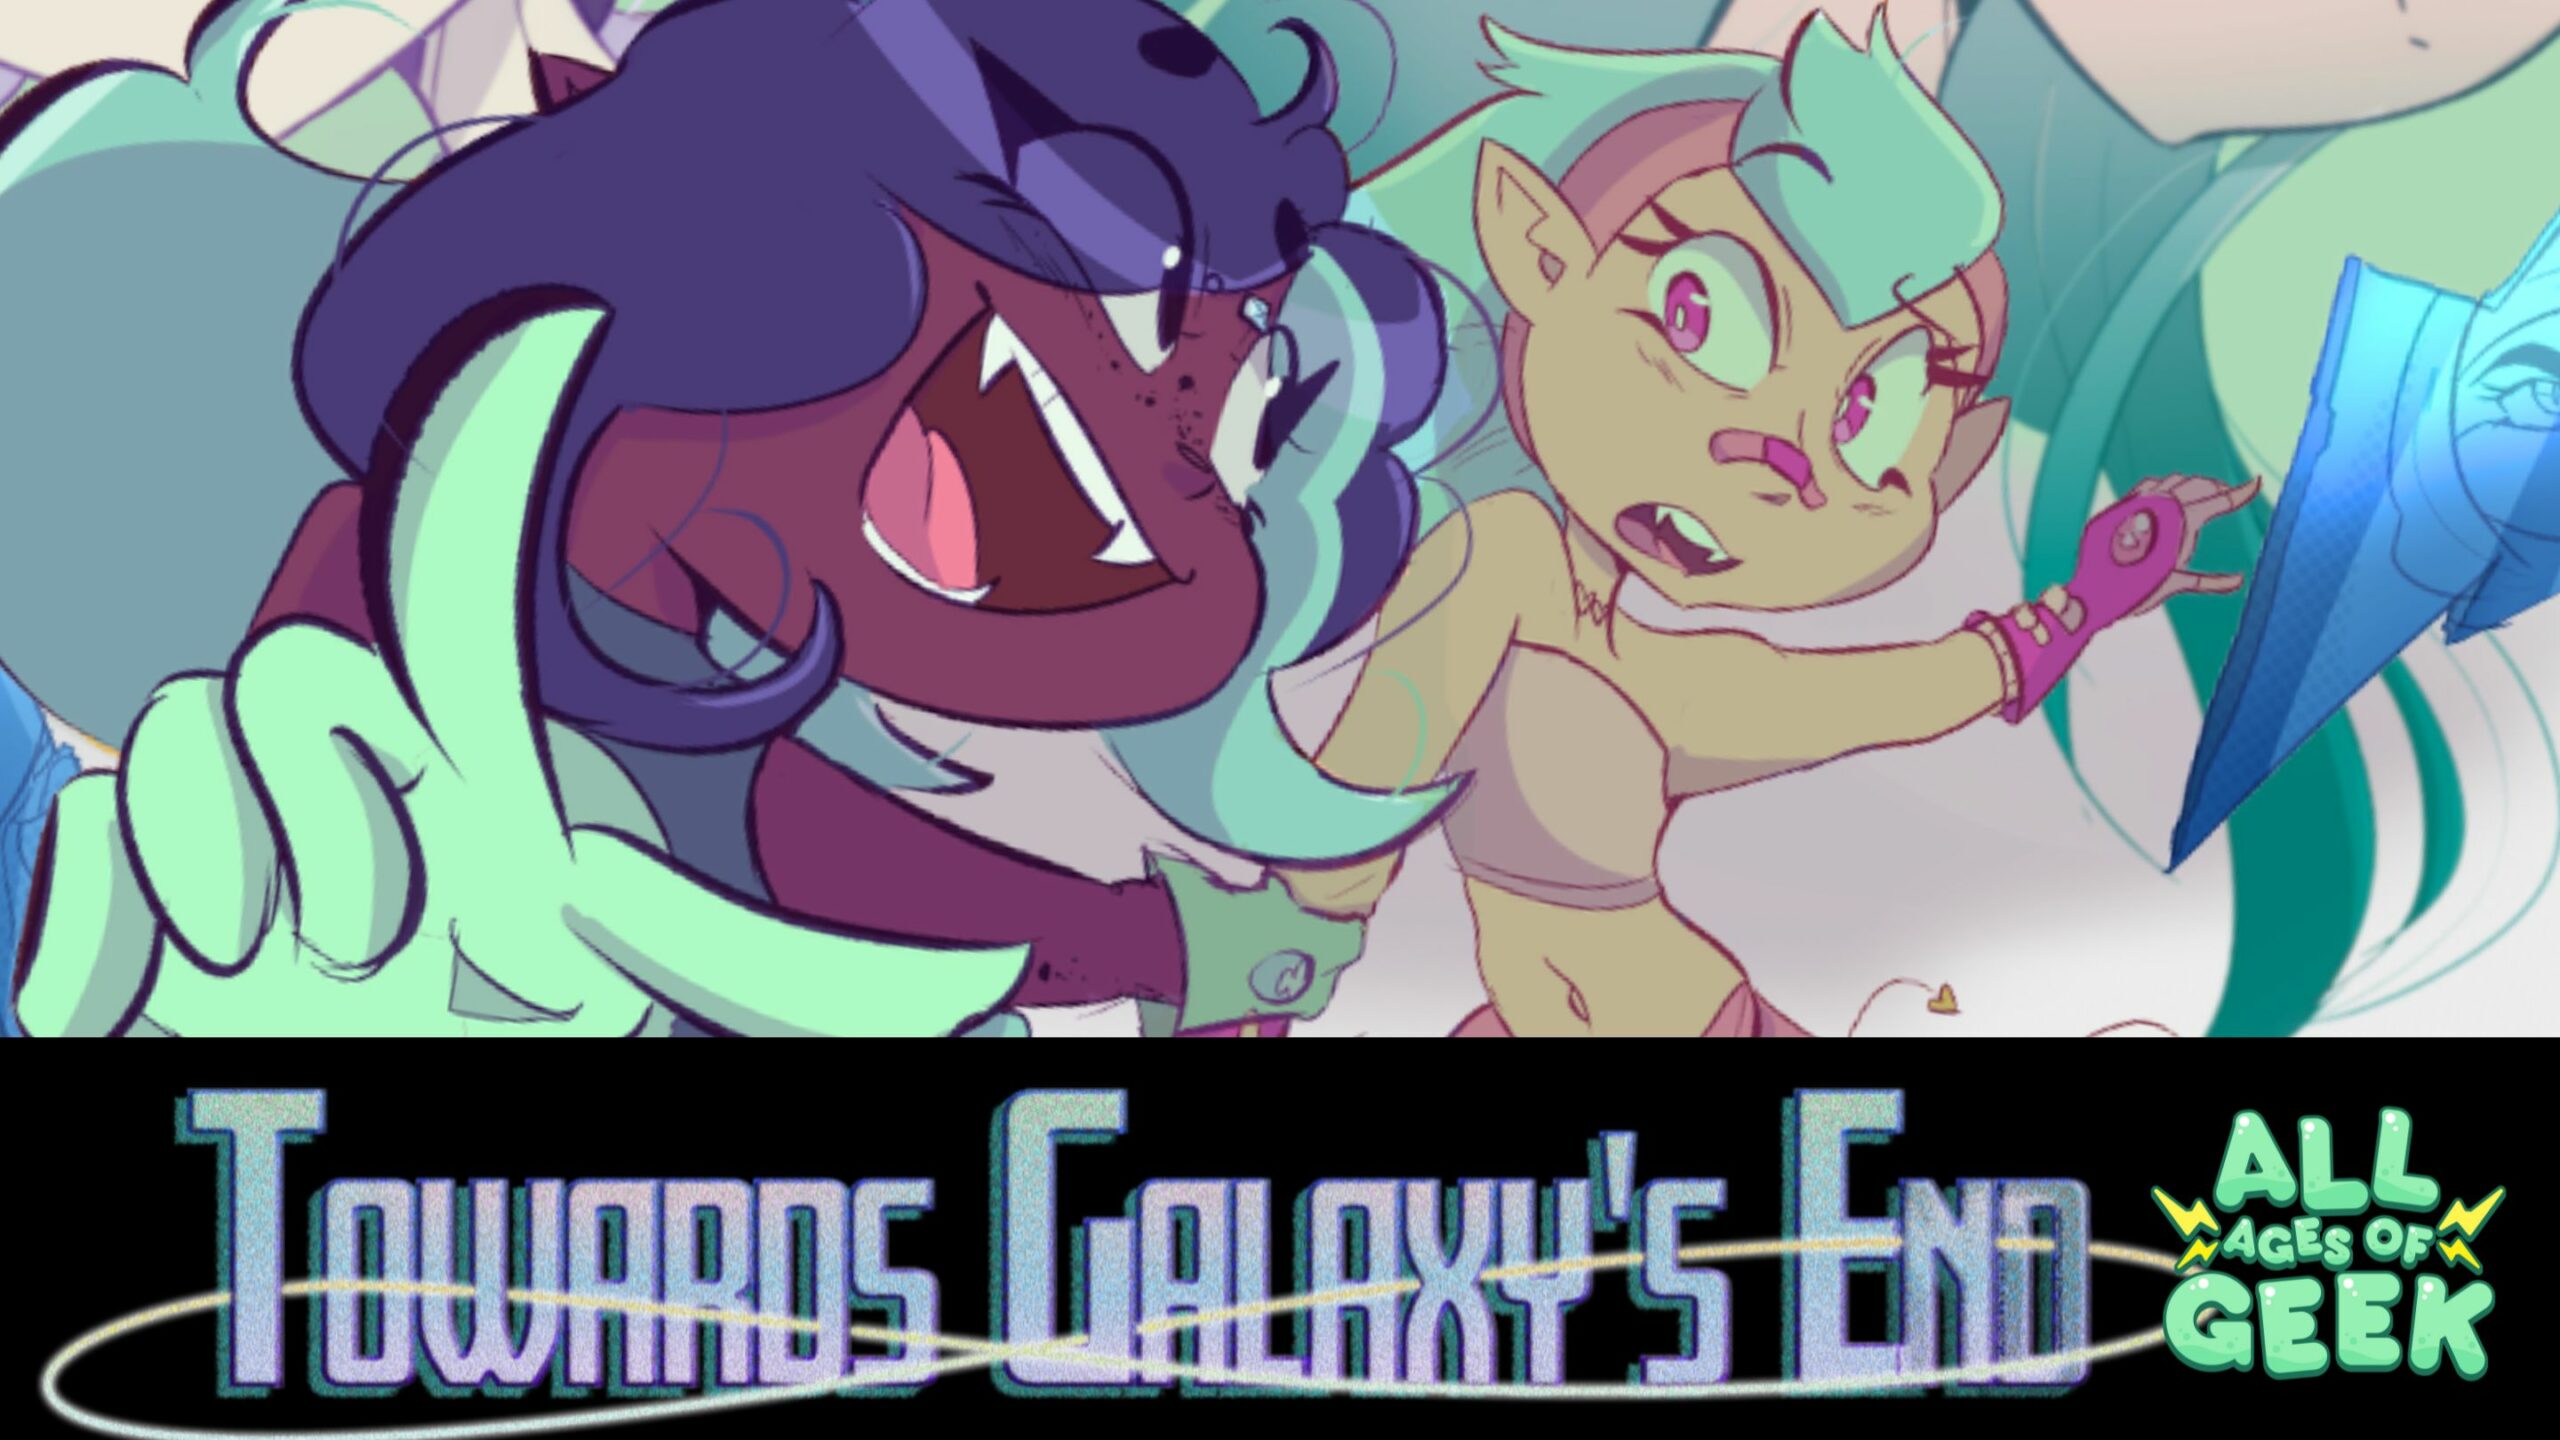 Towards_Galaxy's_End Art thumbnail on All Ages of Geek